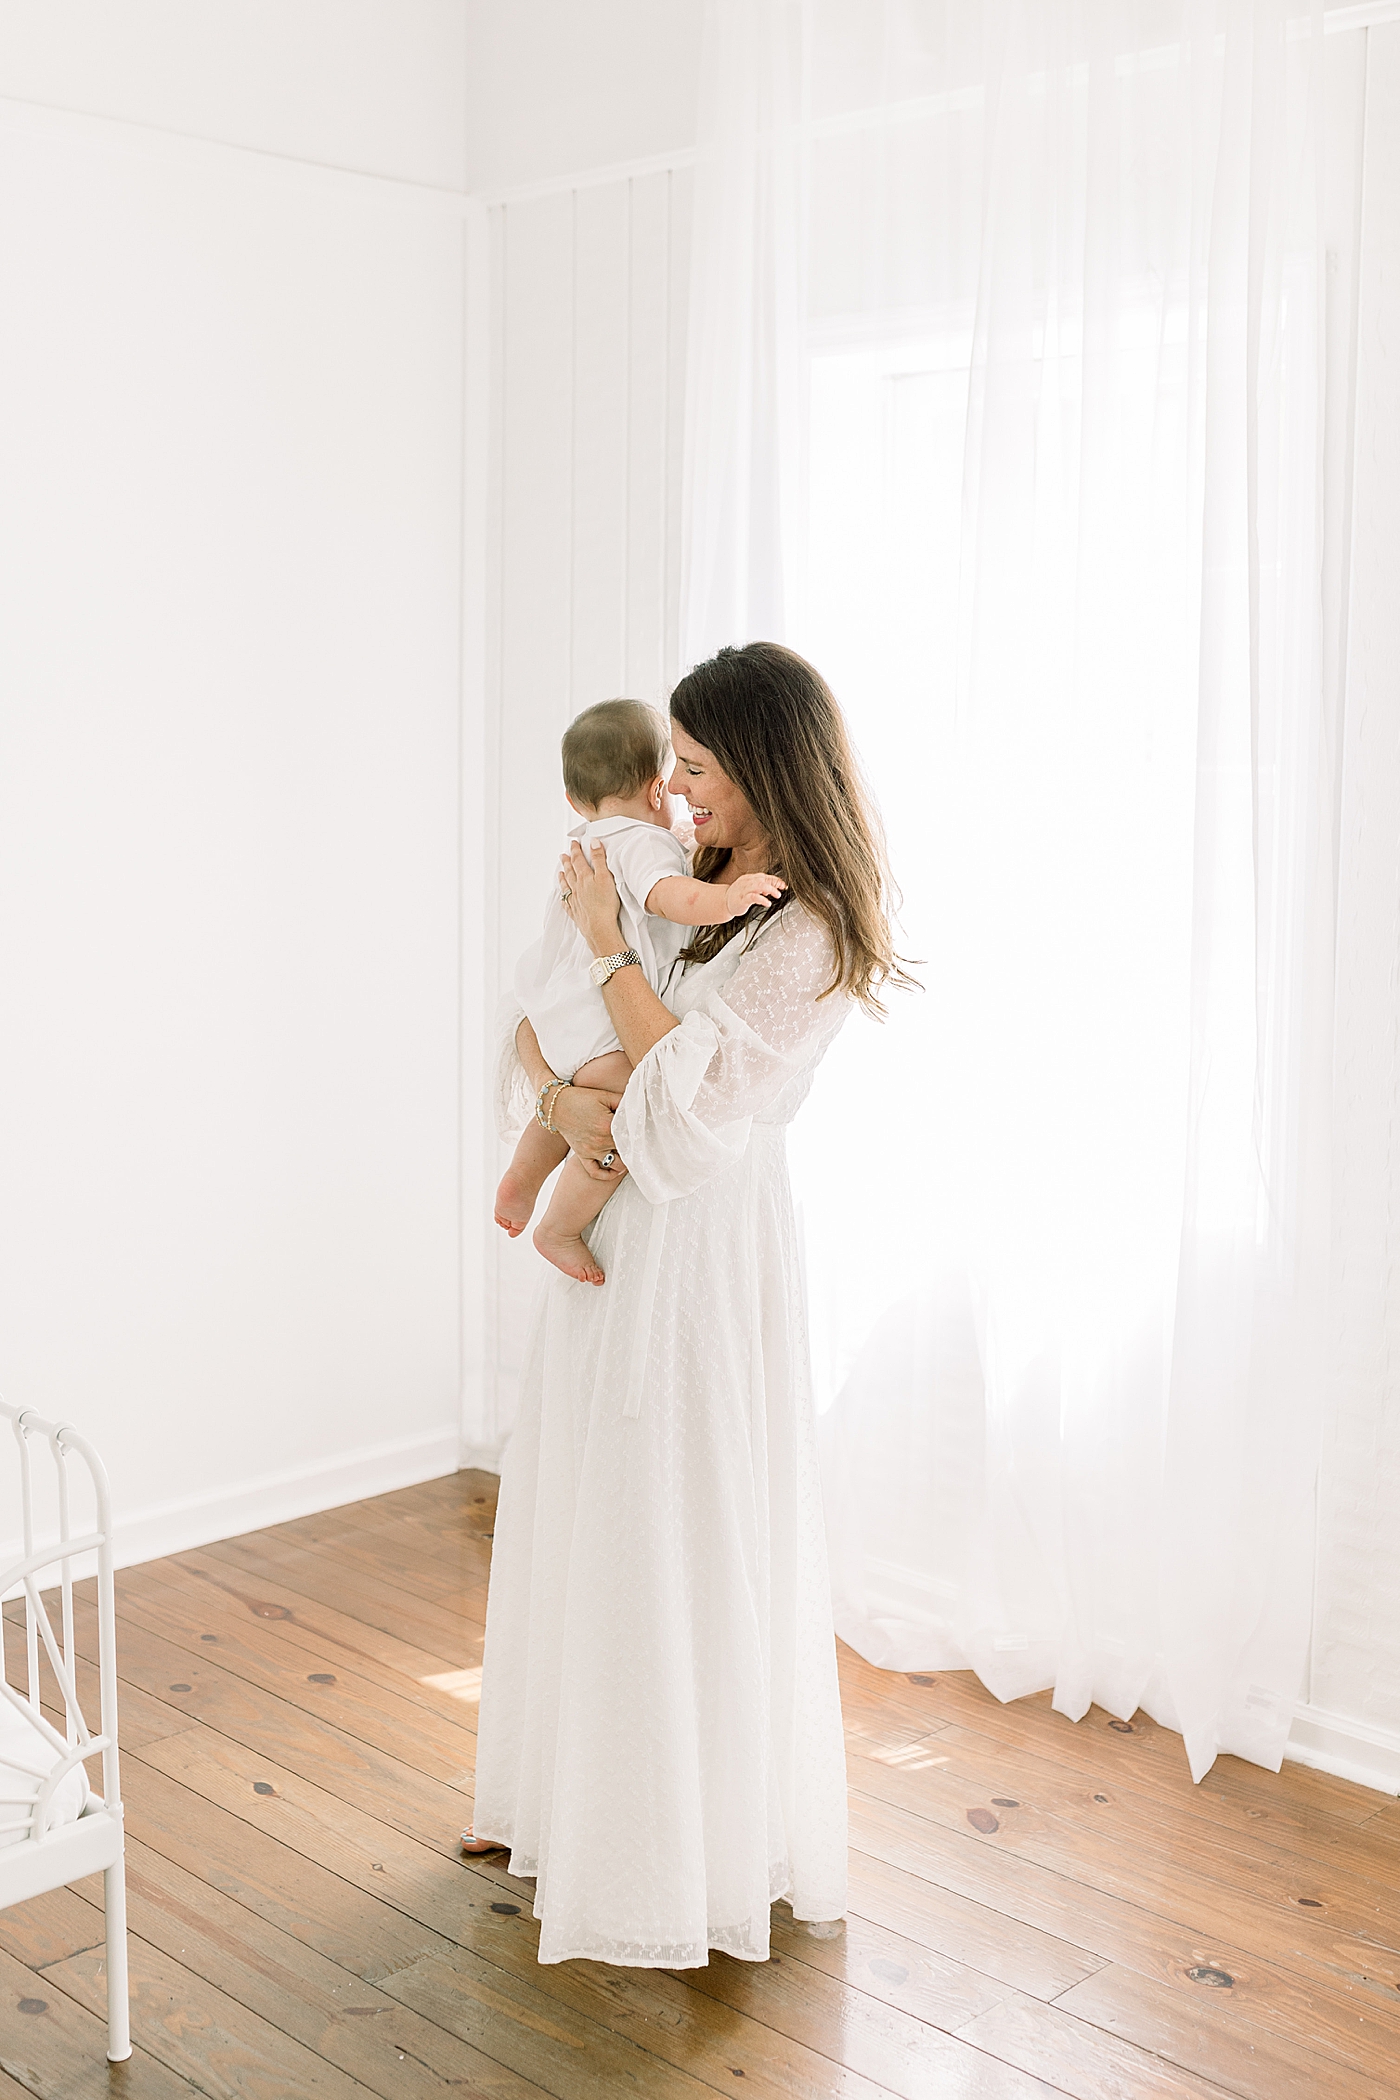 Mother standing up and holding her baby in a softly lit room during Studio Milestone Session | Images by Caitlyn Motycka